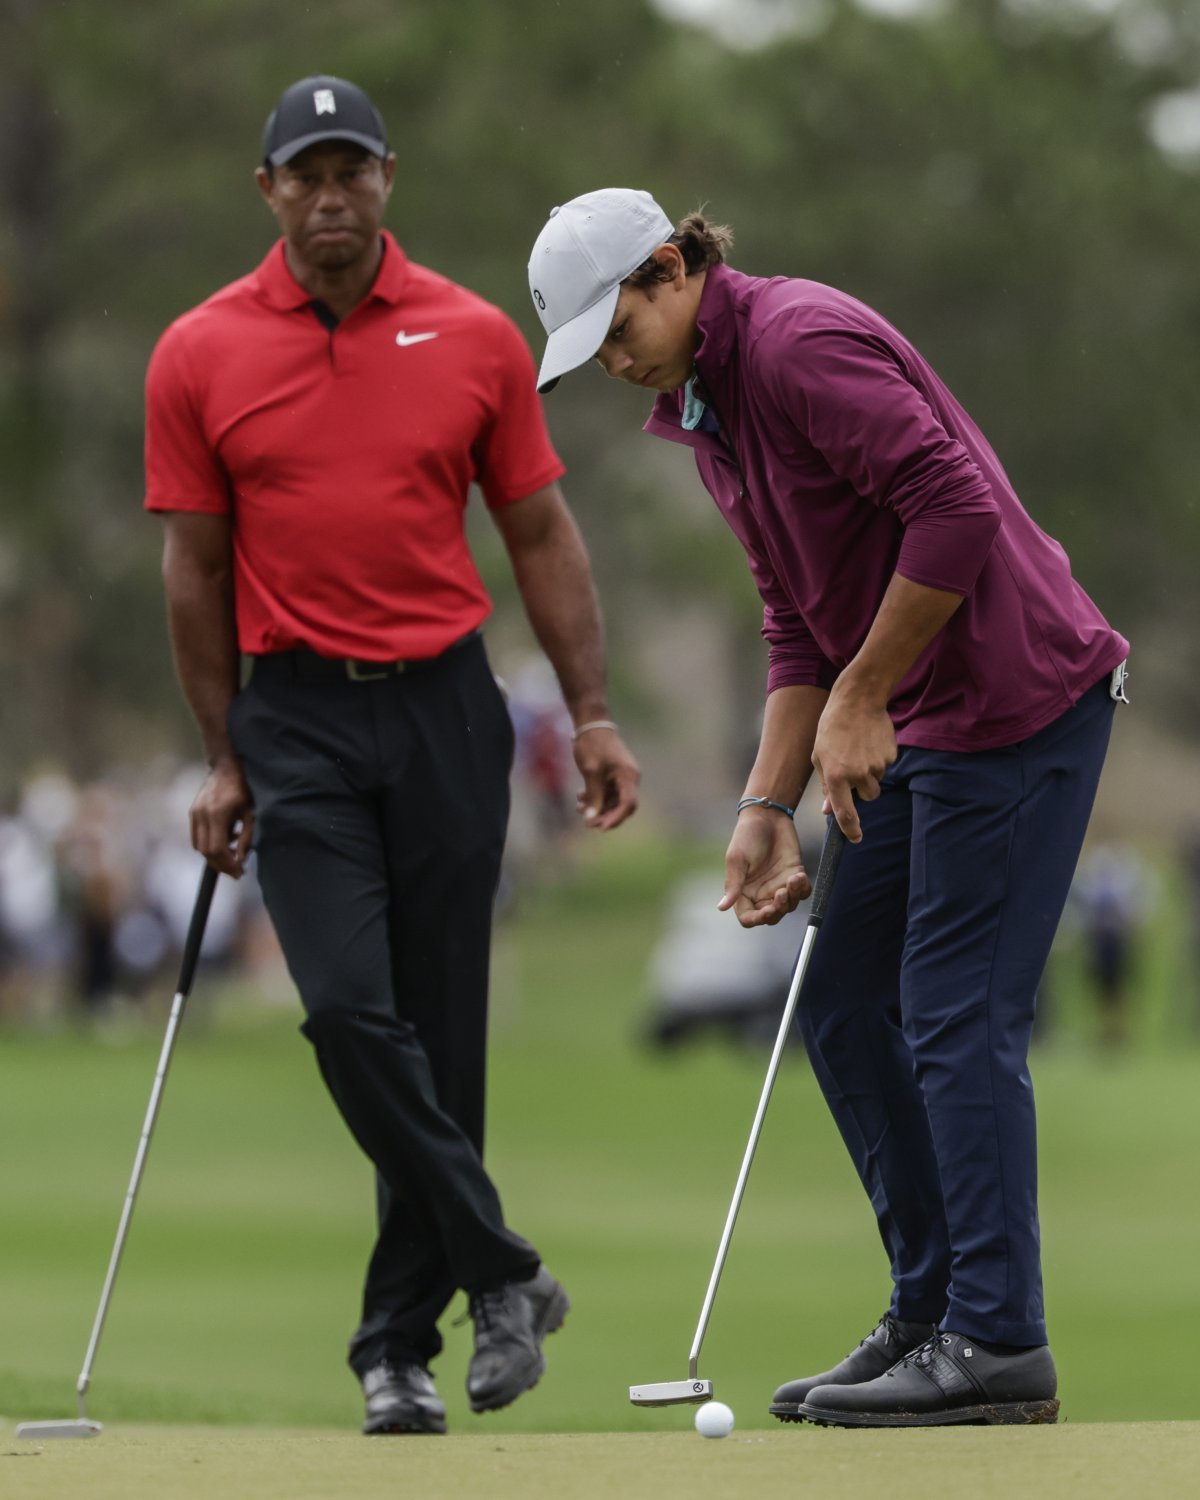 Woods' son Charlie eliminated from PGA US Open qualifying round